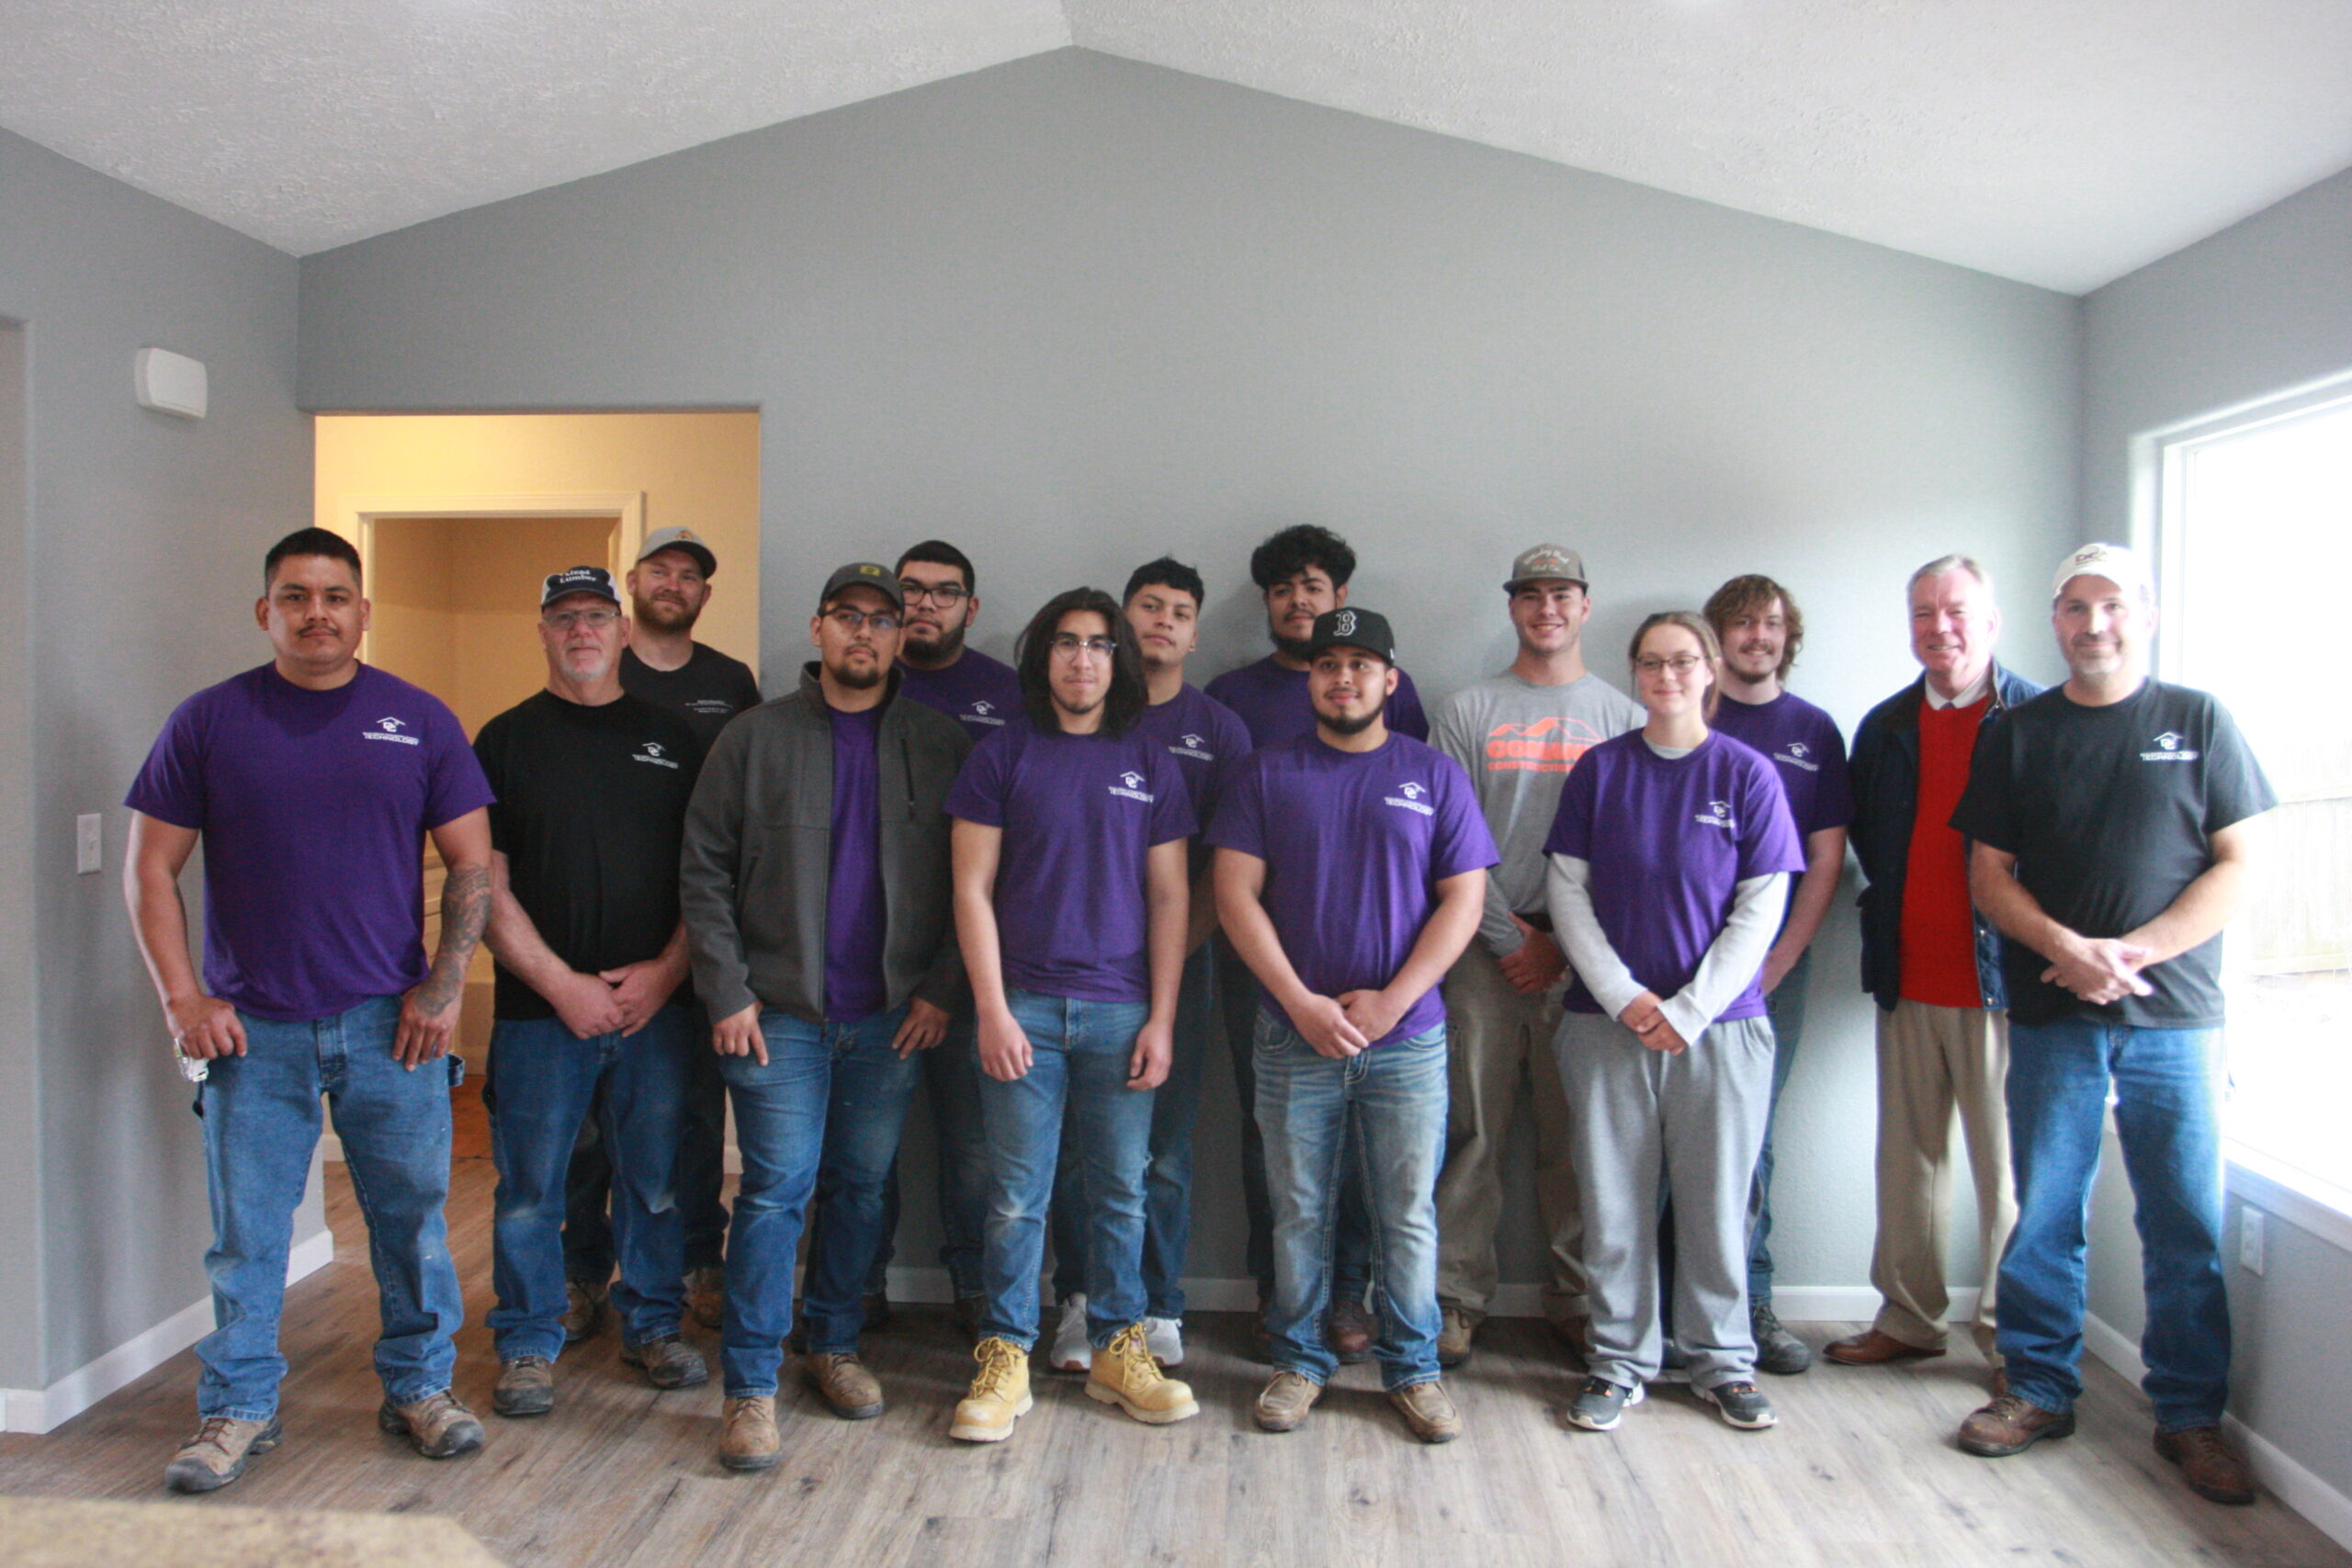 DC3 students and staff gather for a photo during Tuesday’s open house at 1601 Mulberry Circle. Through this ongoing partnership with the Community Housing Association of Dodge City (CHAD), DC3 Building Construction Technology students learn all facets of the building process